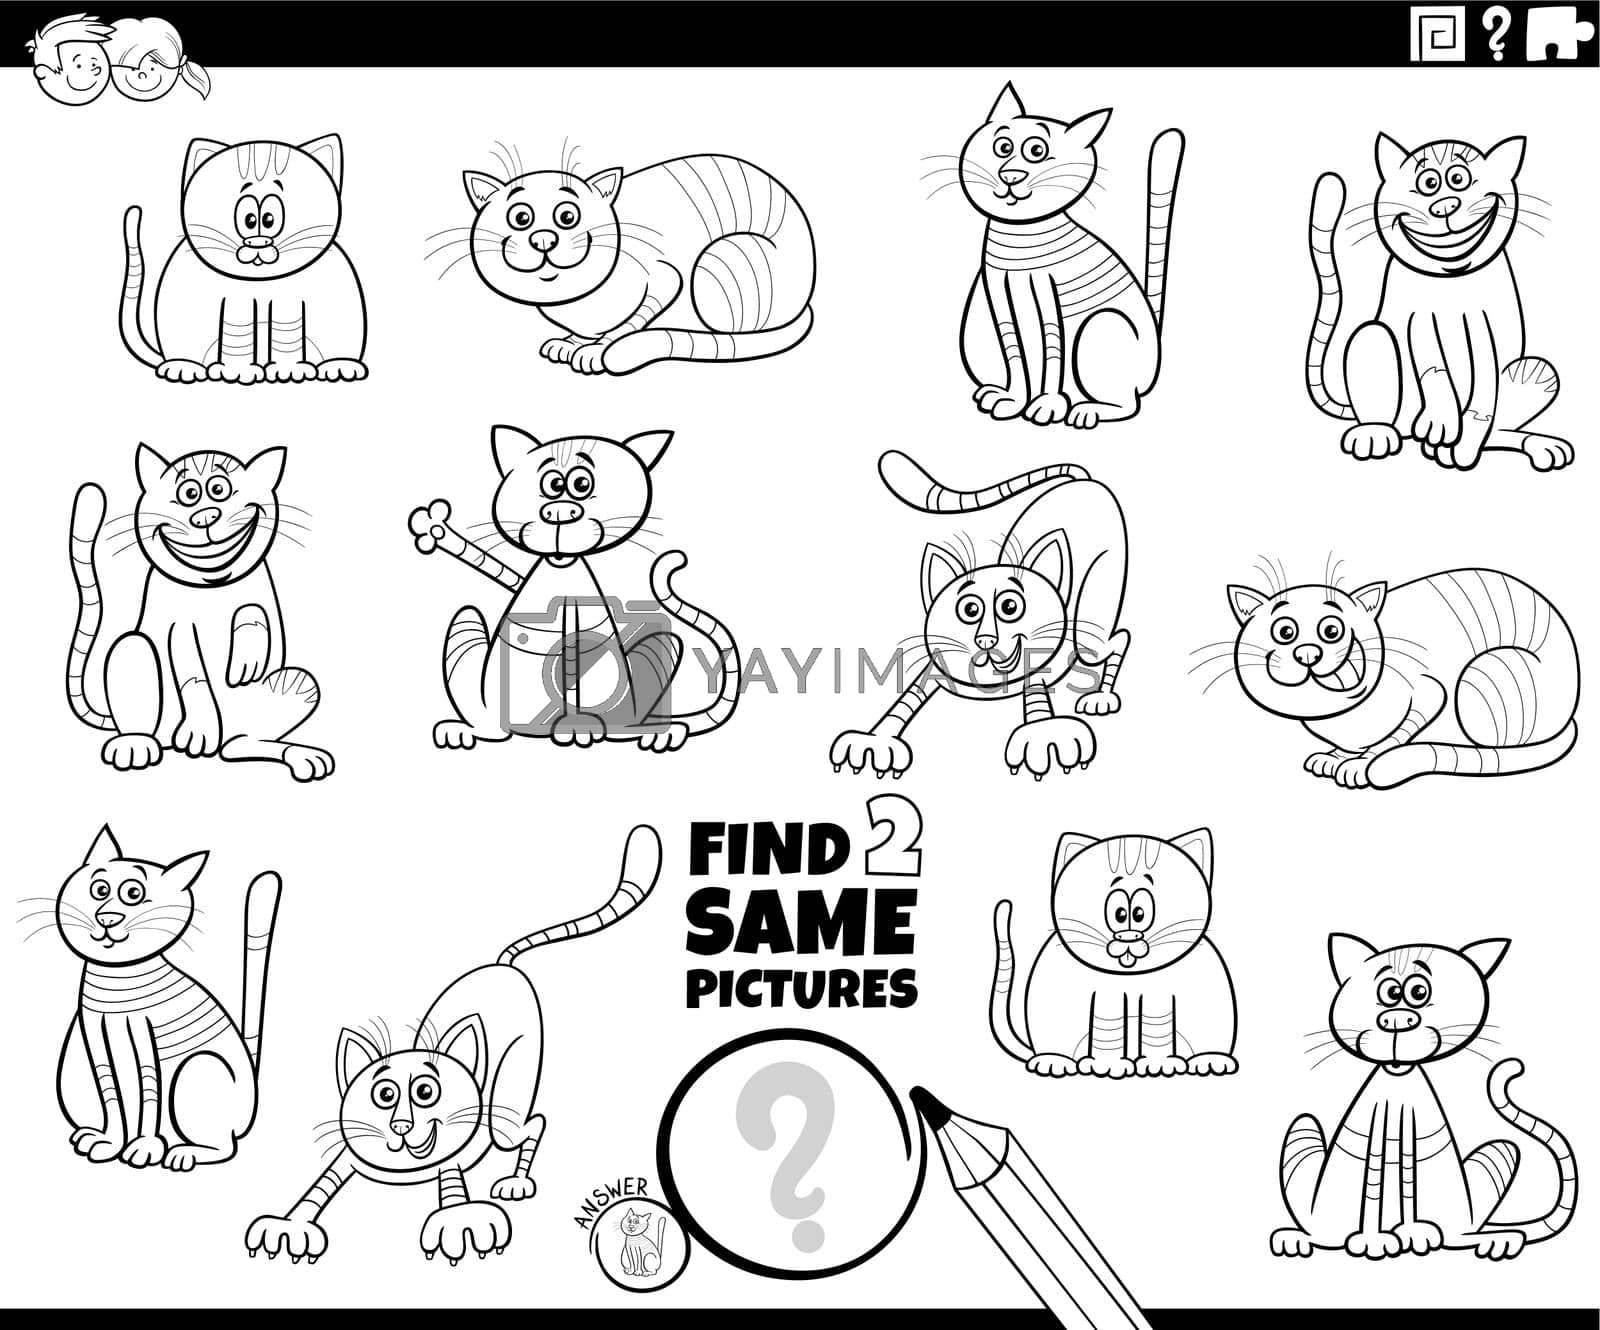 Royalty free image of find two same cartoon cats task coloring page by izakowski